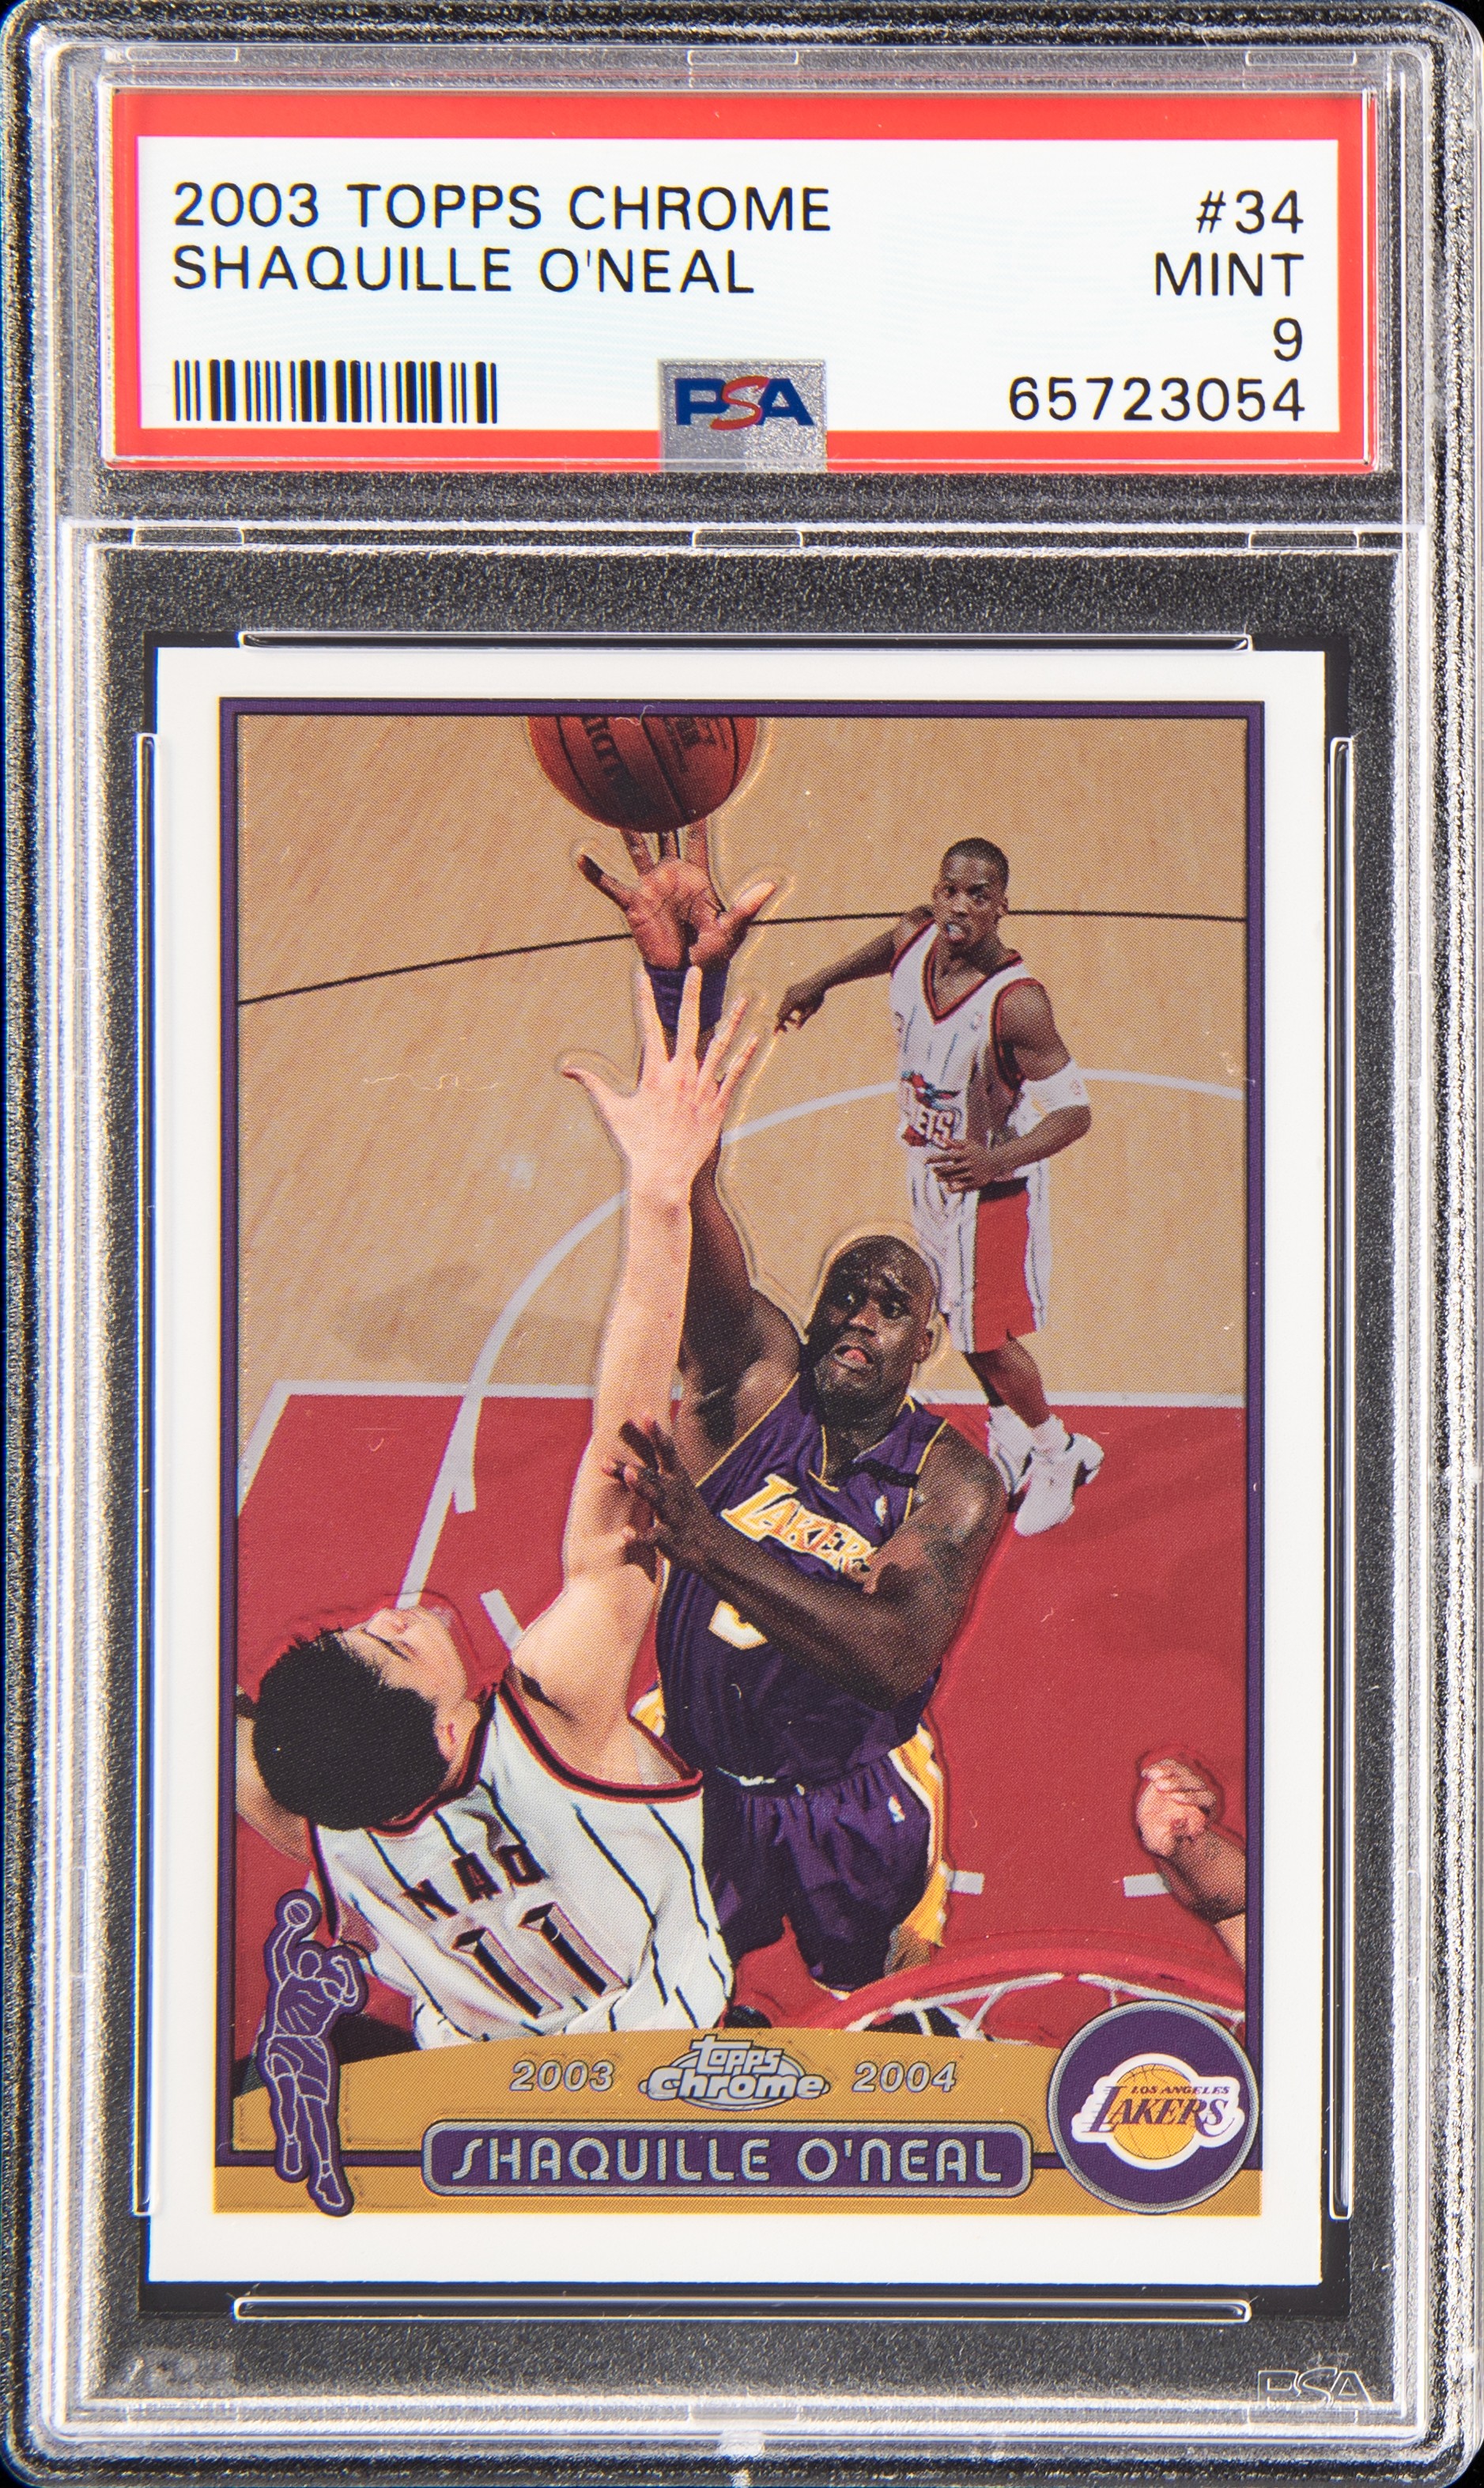 2003 Topps Chrome 34 Shaquille O'Neal – PSA MINT 9